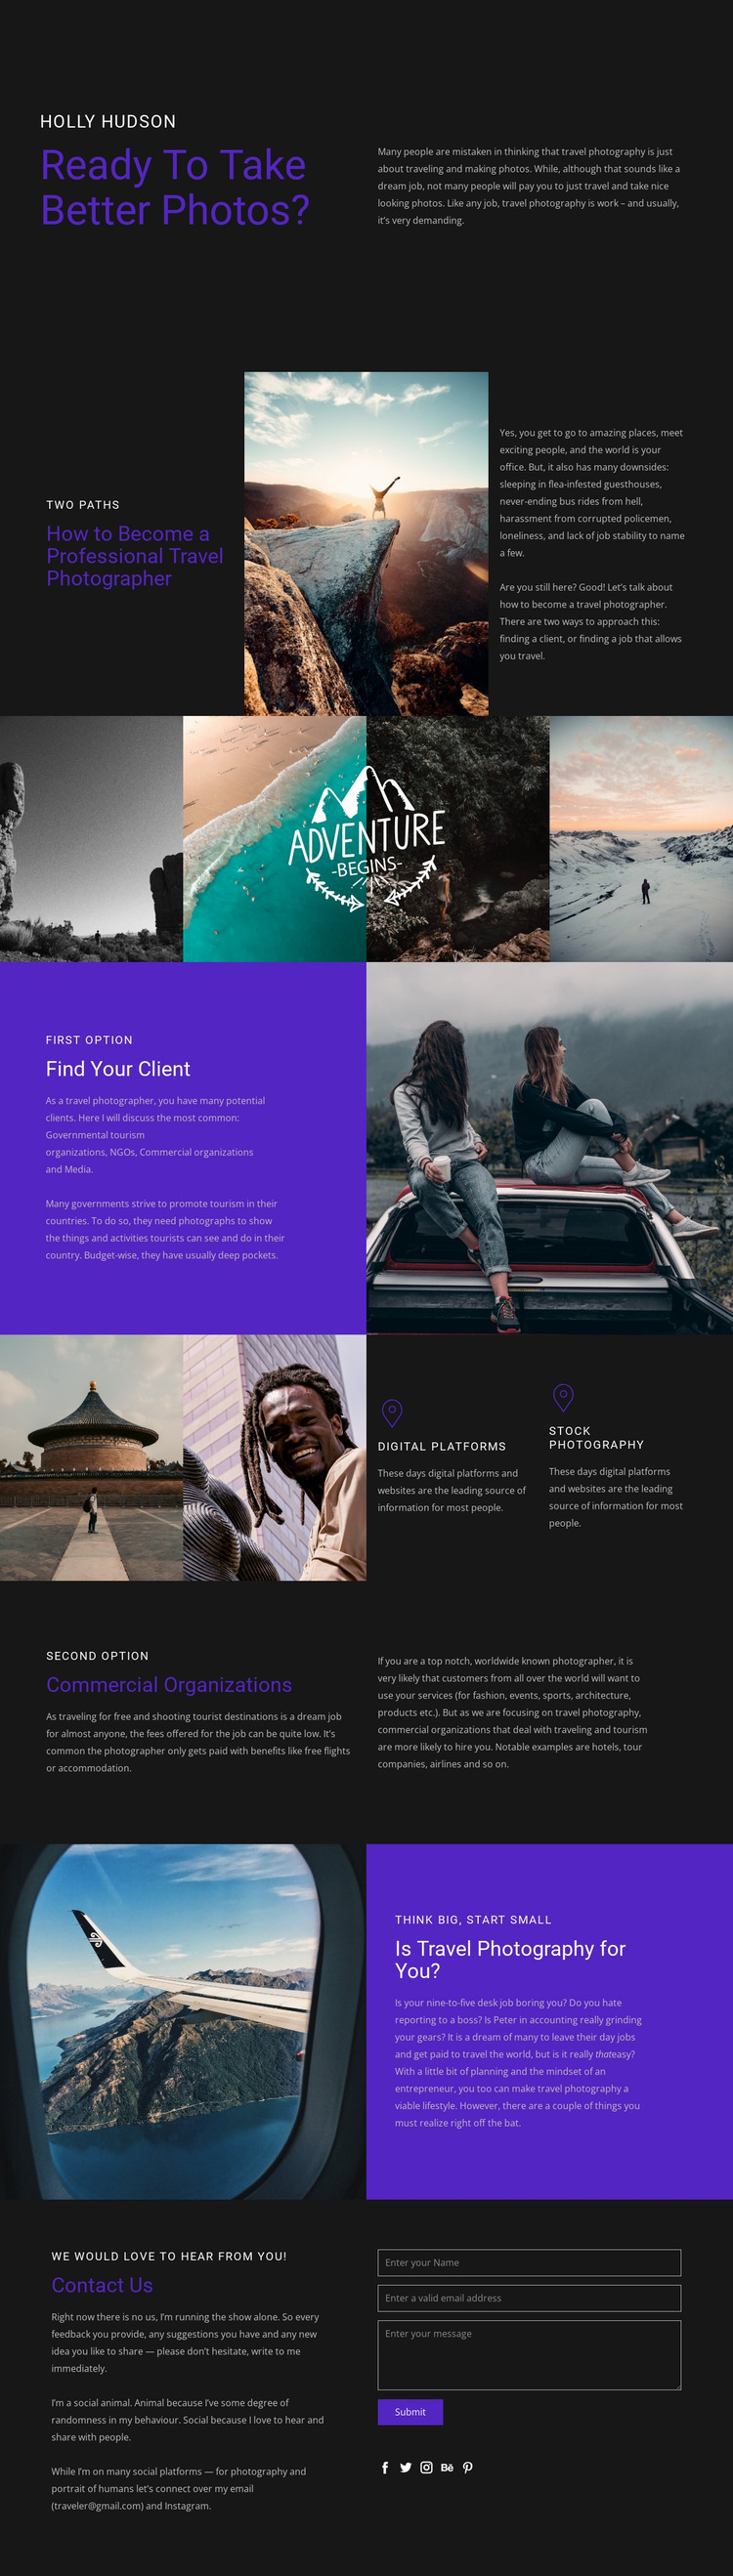 Travel and photography Website Mockup